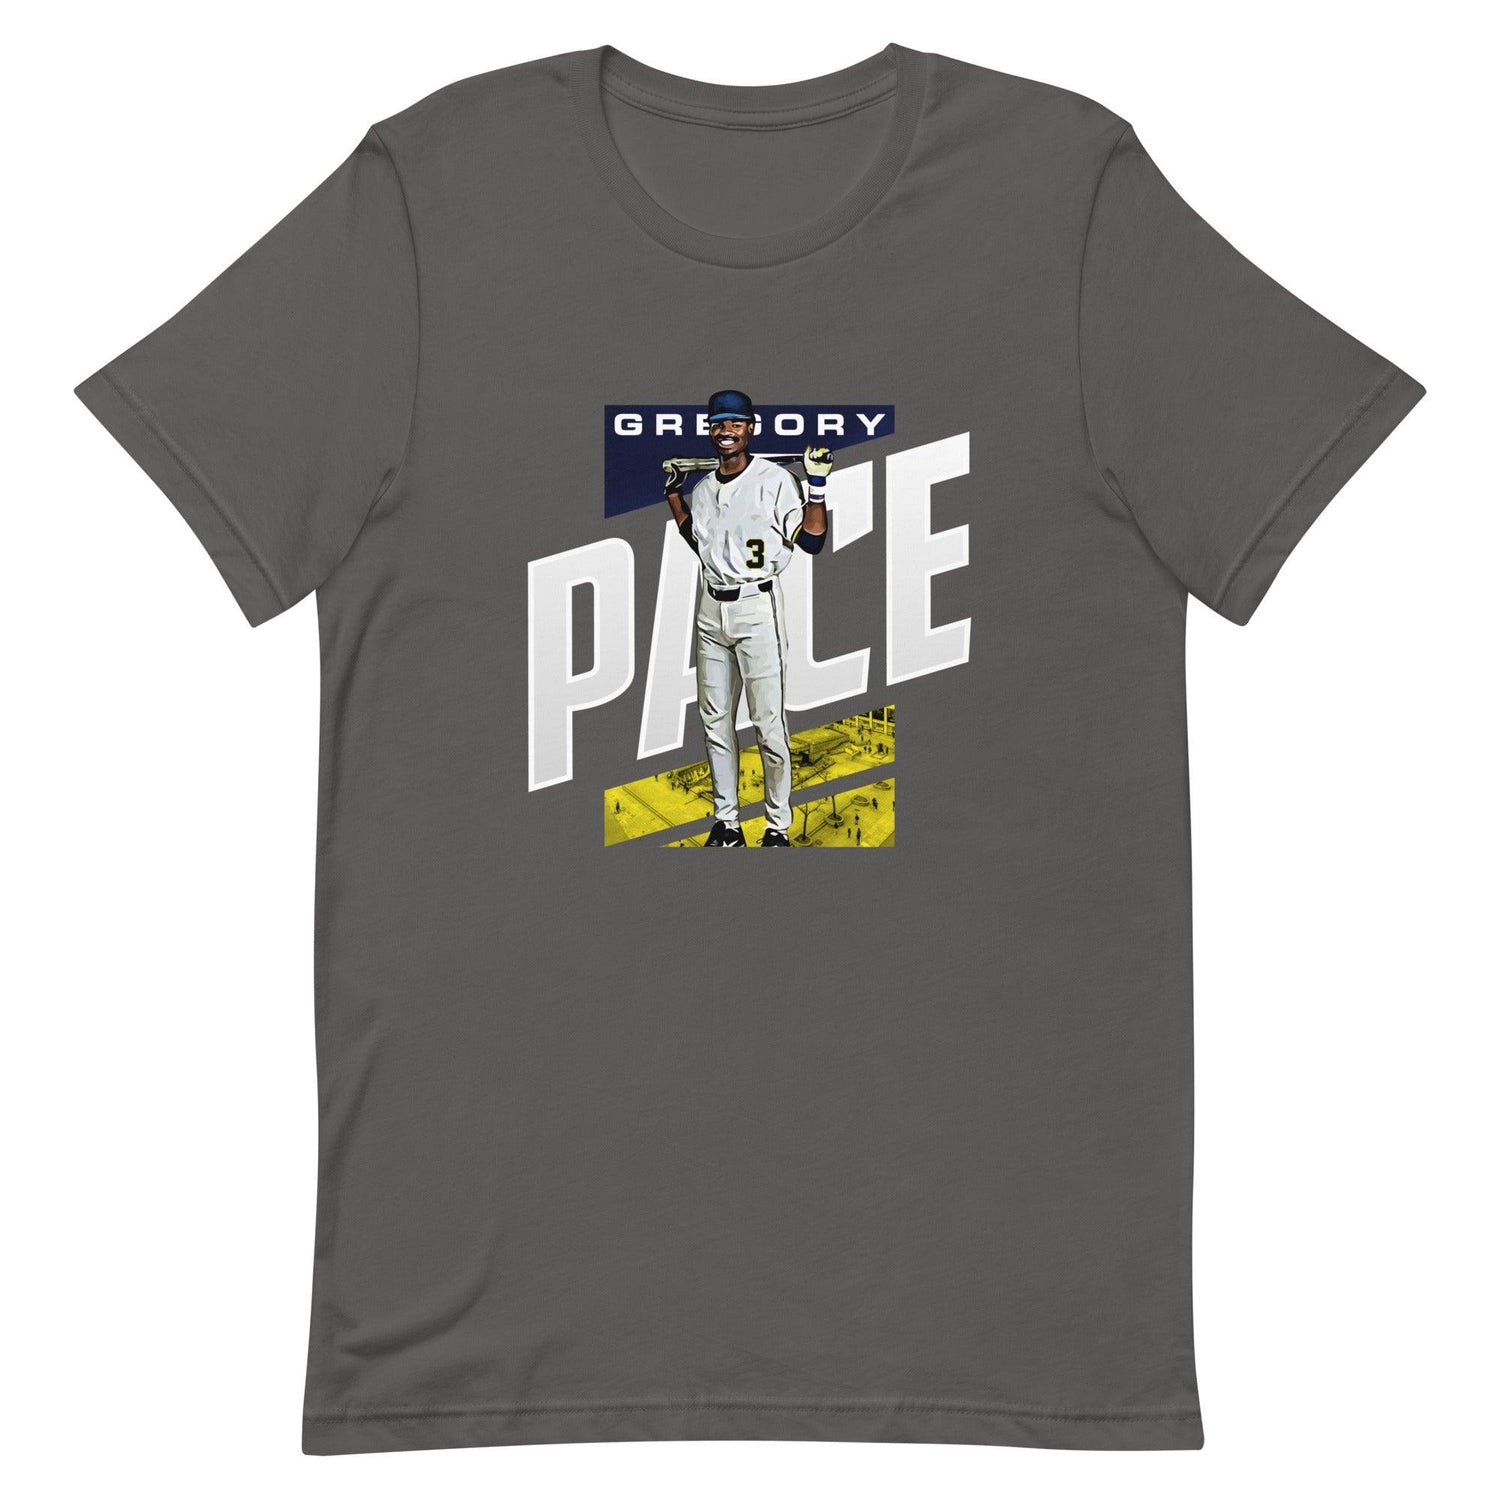 Gregory Pace "Gameday" t-shirt - Fan Arch